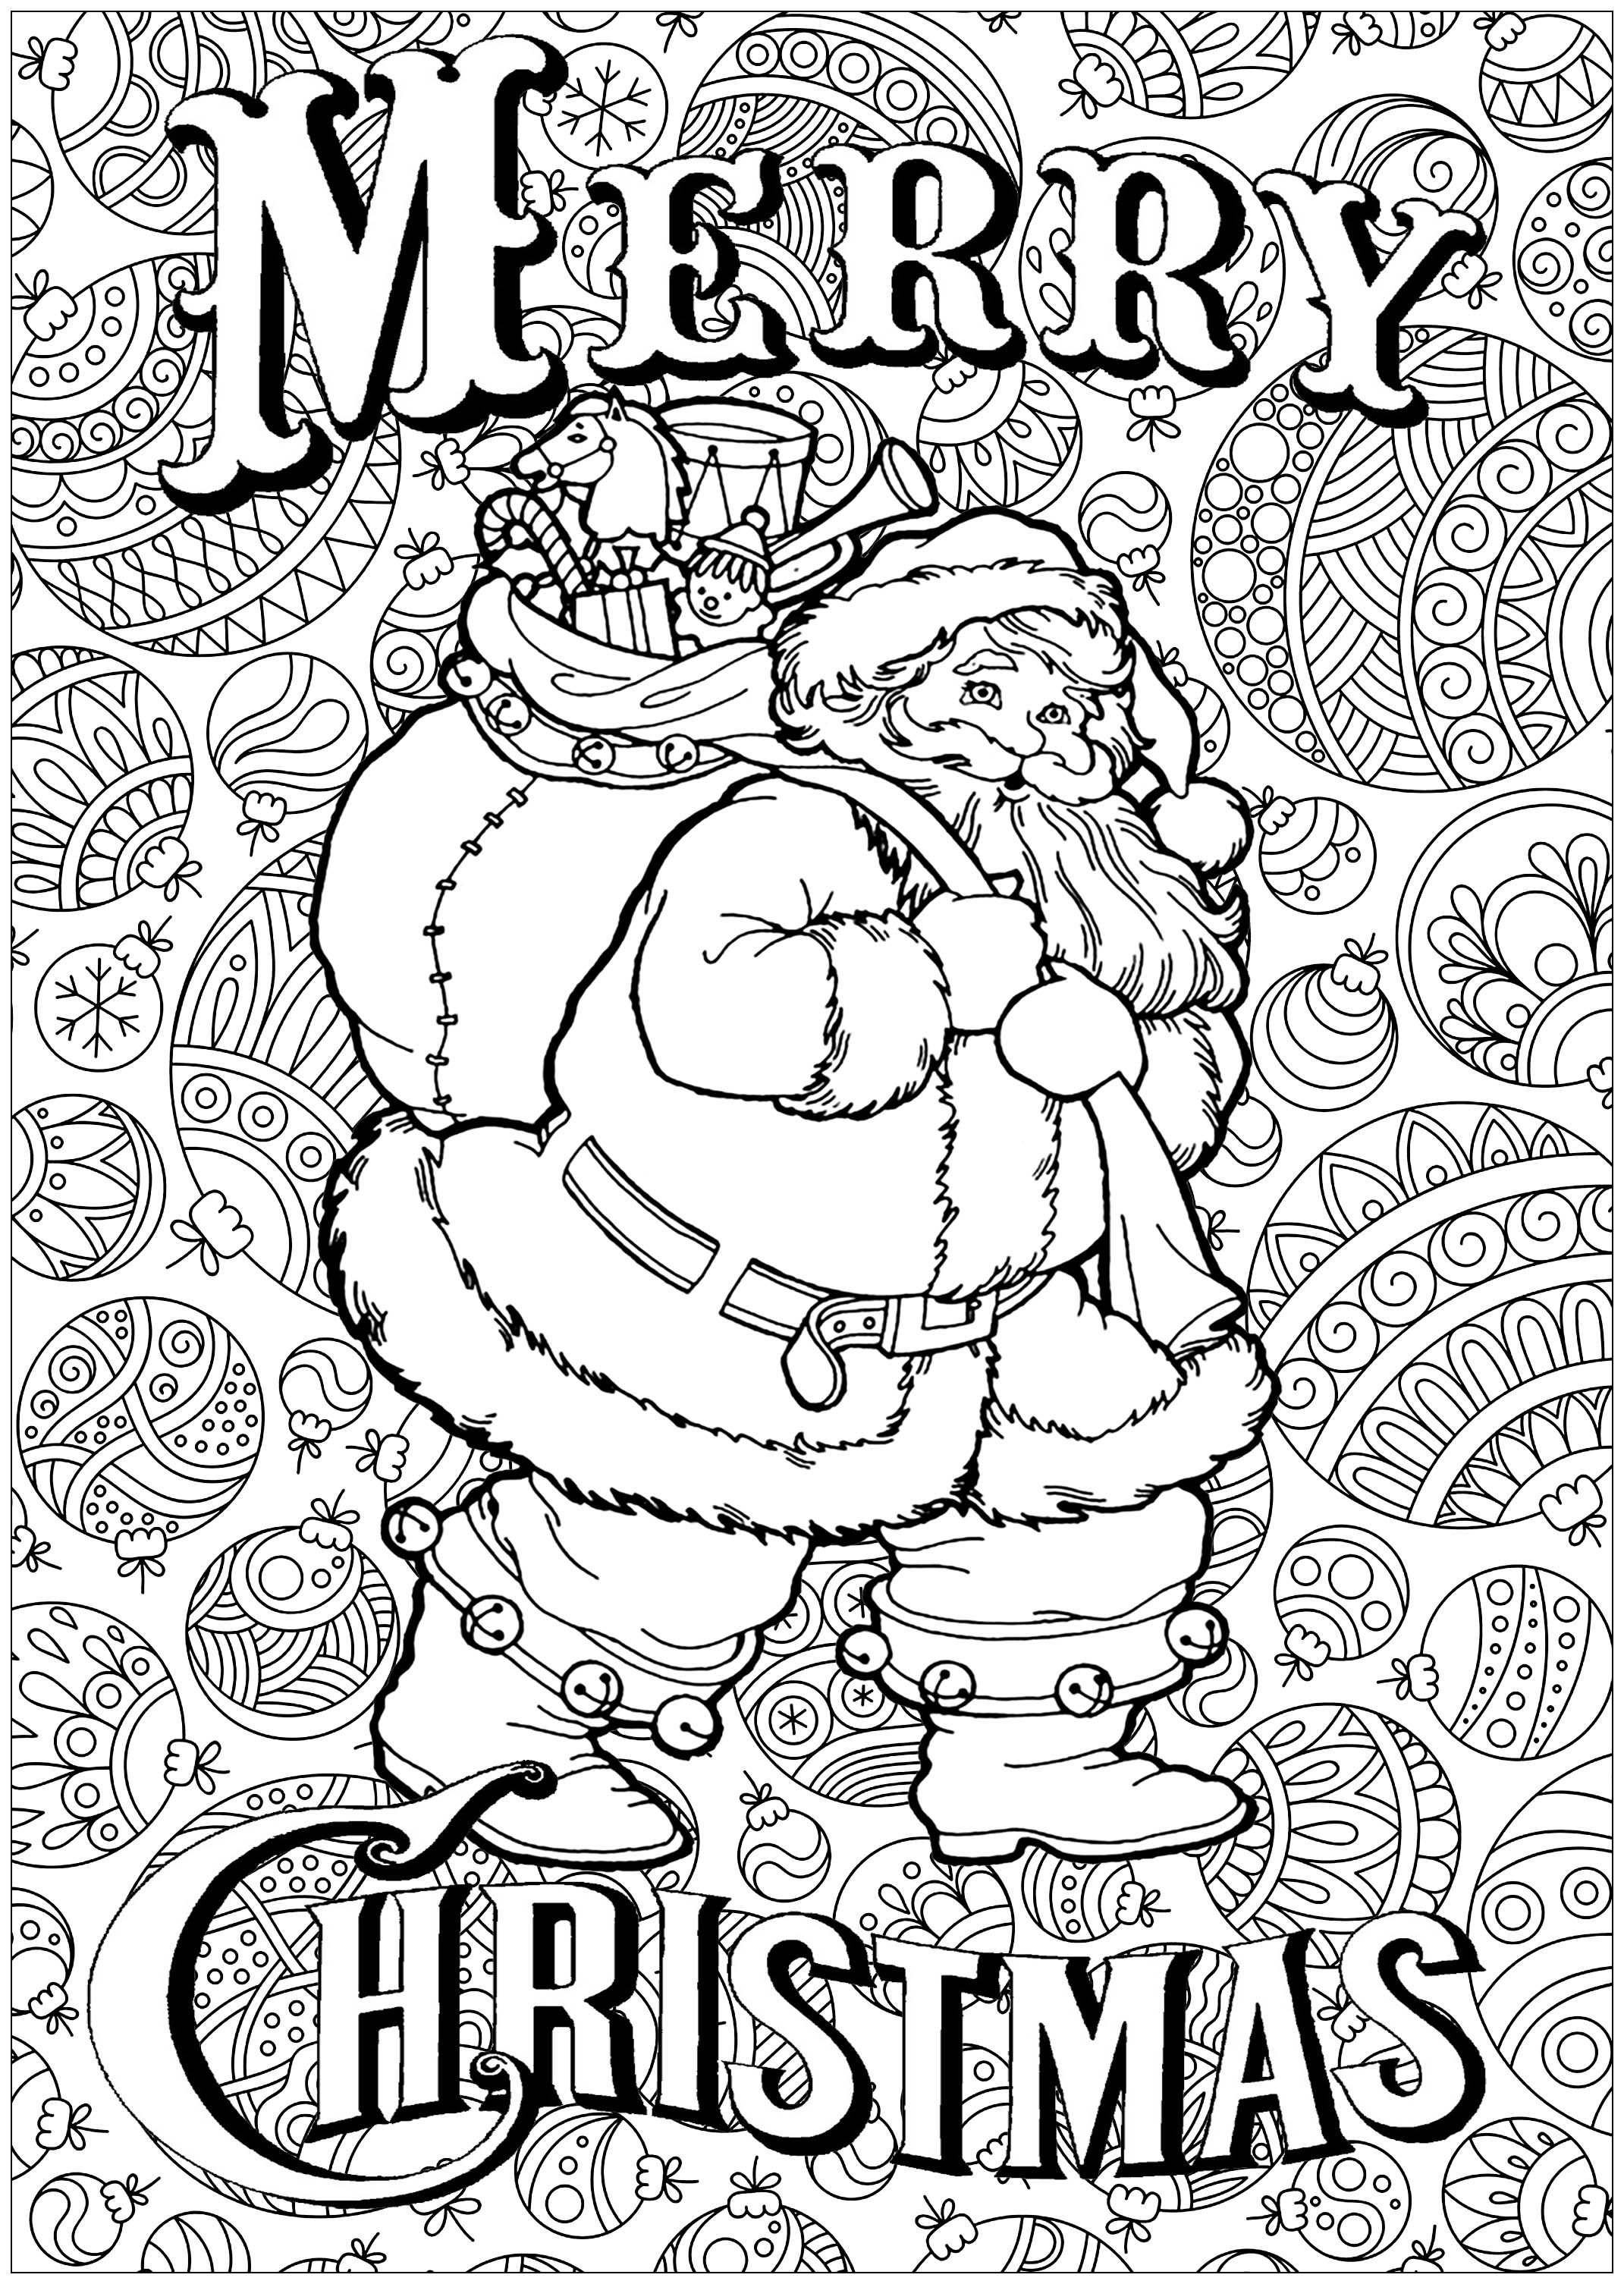 Santa claus with text and background - Christmas Adult Coloring Pages